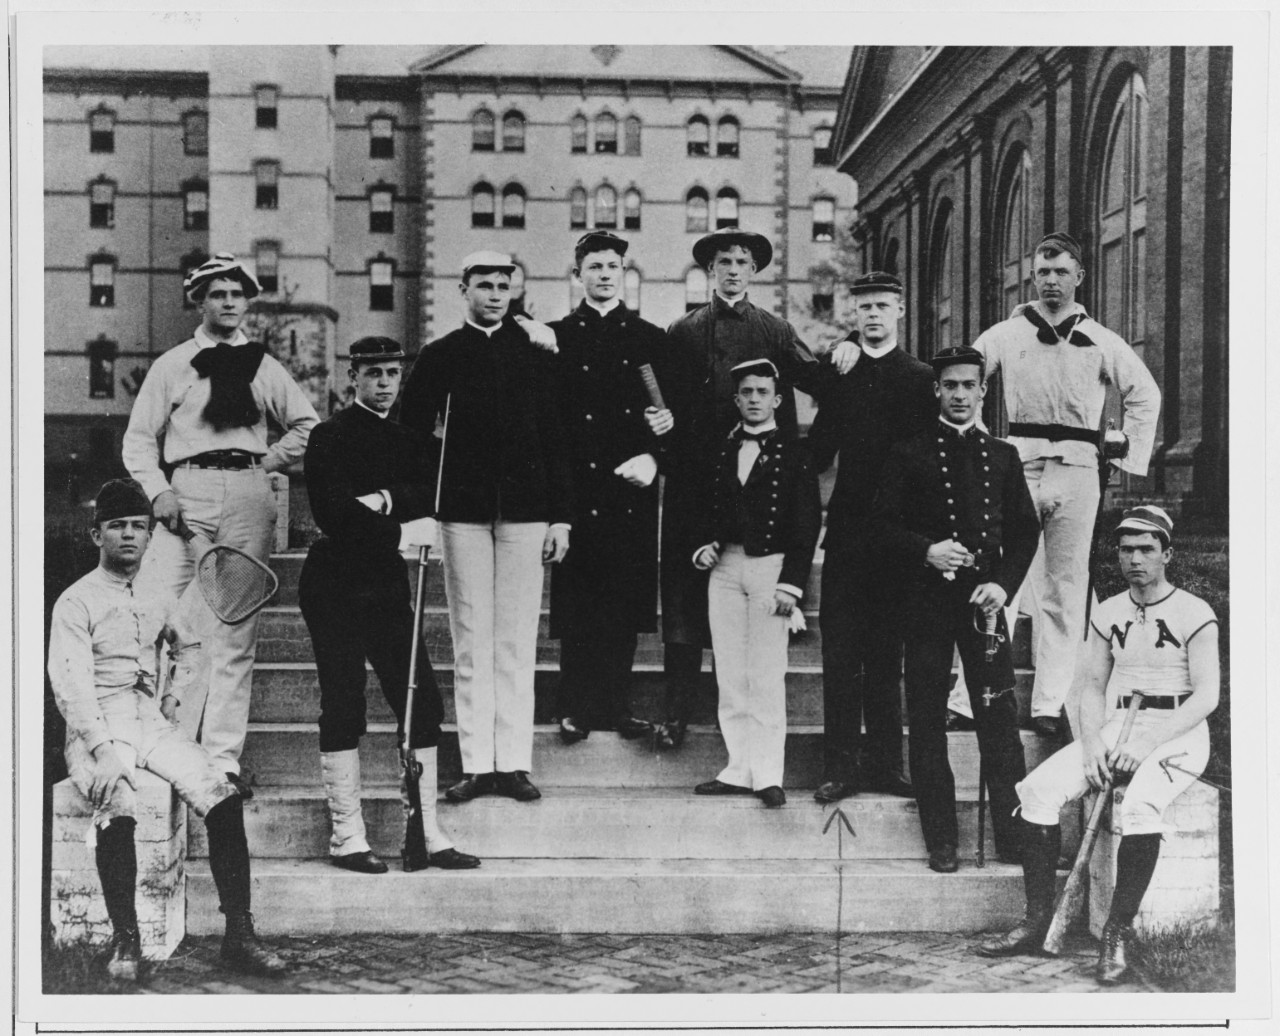 Class of 1888 at the U.S. Naval Academy